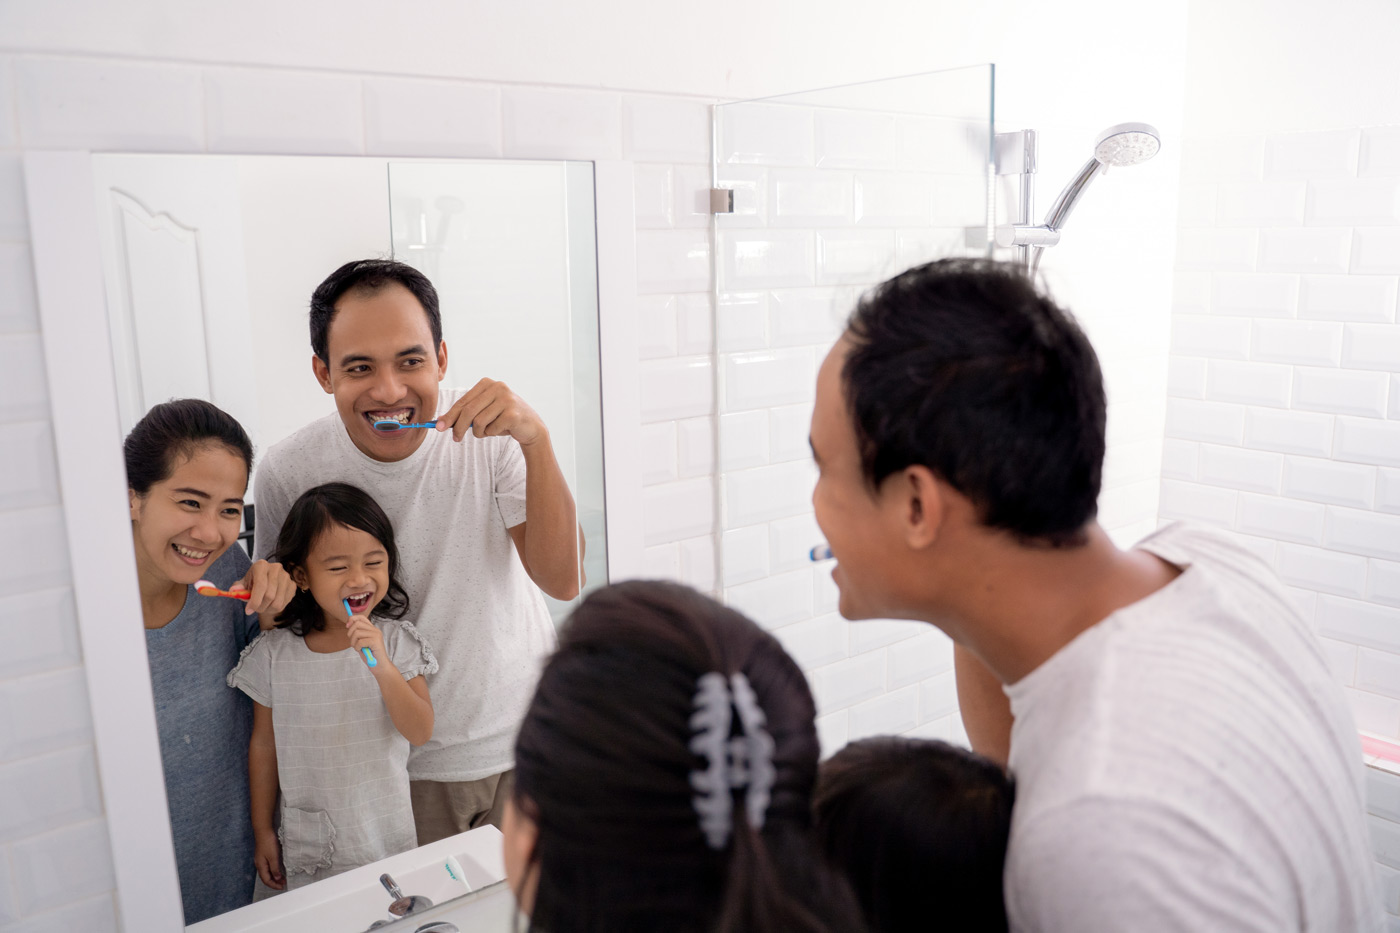 A family of three happily brushing their teeth together in a bathroom.